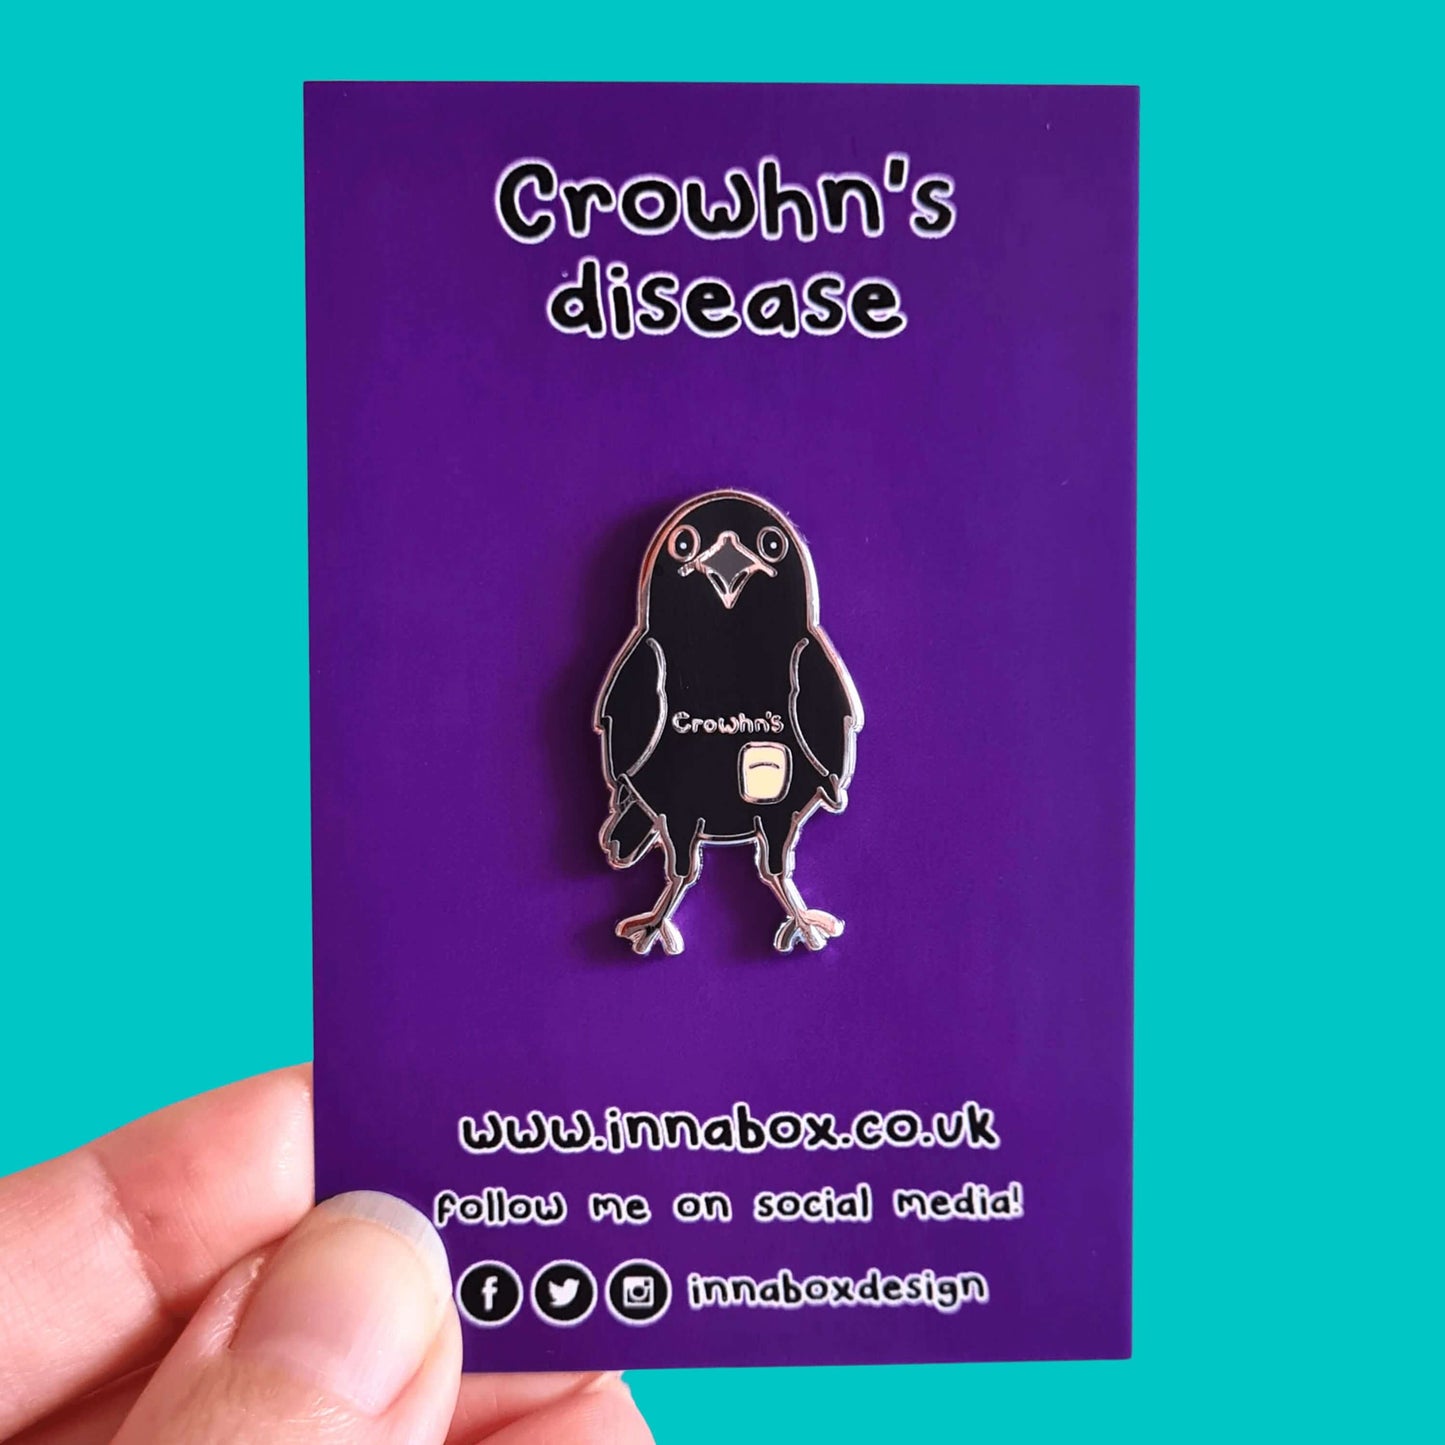 The Crowhn's Disease Enamel Pin - Crohn's Disease on purple backing card with top text reading 'Crowhn's disease' and bottom text of innabox social media handles being held over a blue background. The black crow shape pin has a white stoma bag fitted and the text reading 'chrowhn's' across its chest. The design is raising awareness for crohn's disease.